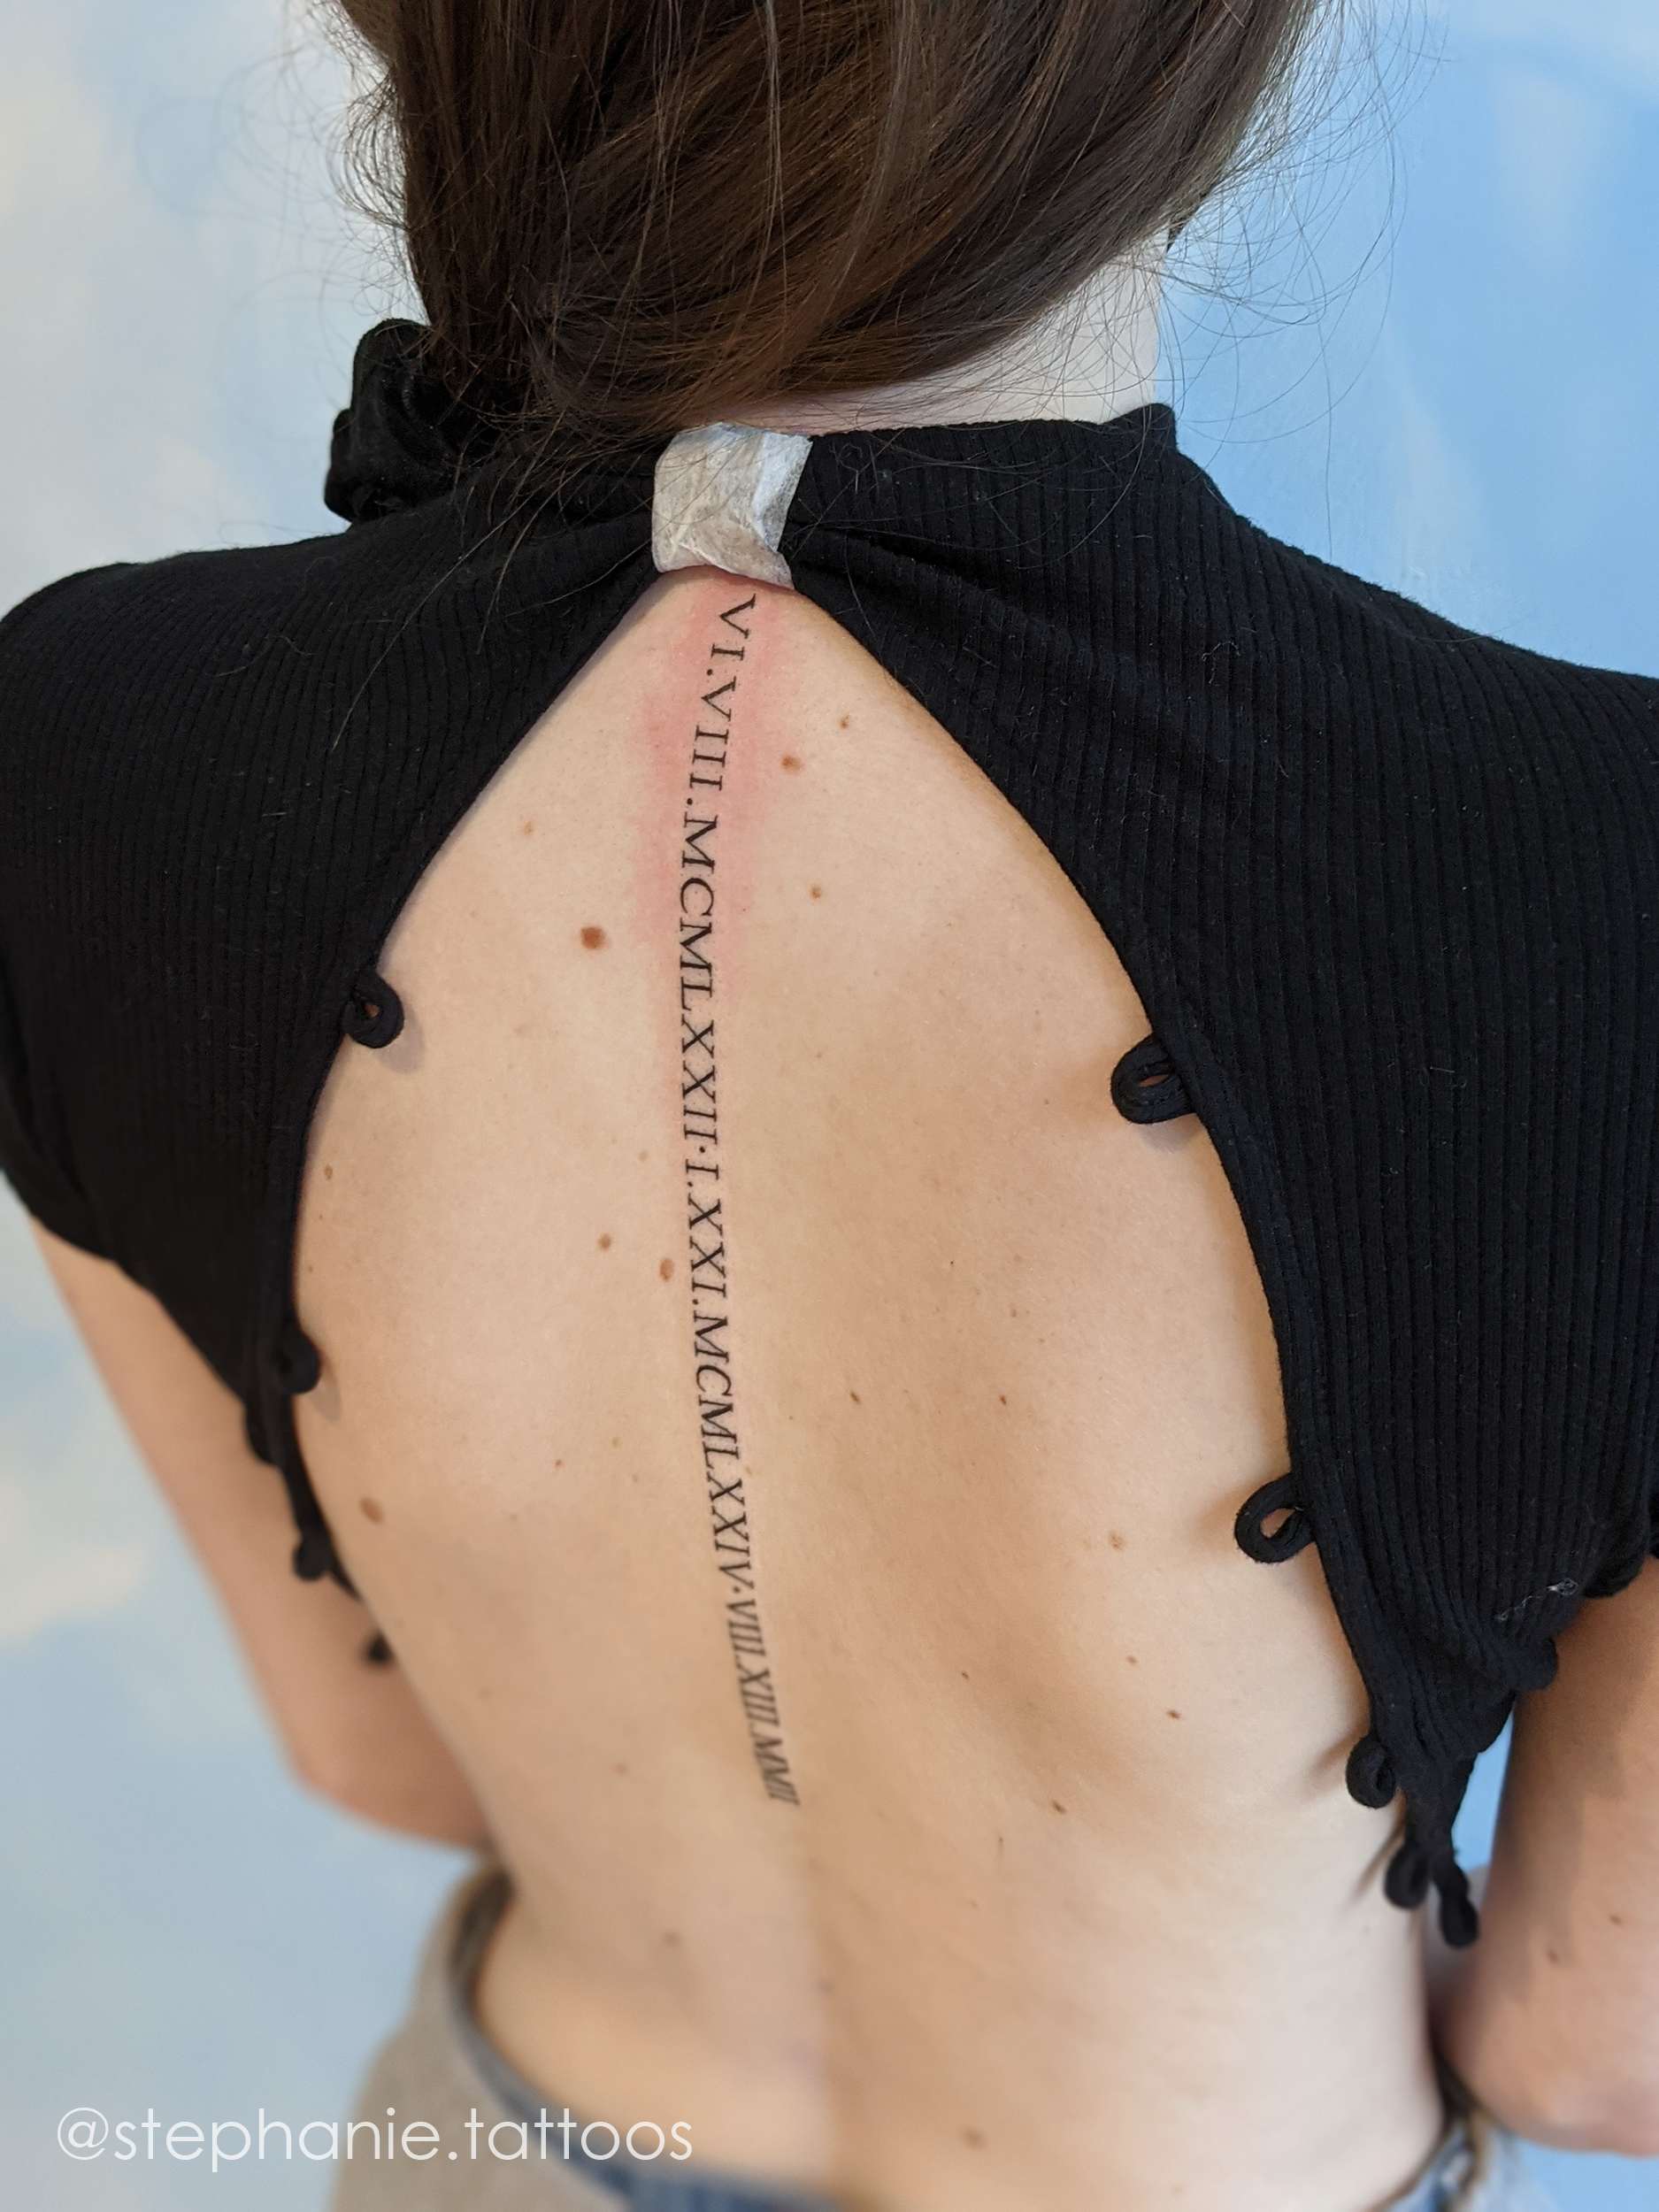 Scoliosis Health  Loving this 3D tattoo very unique I have never